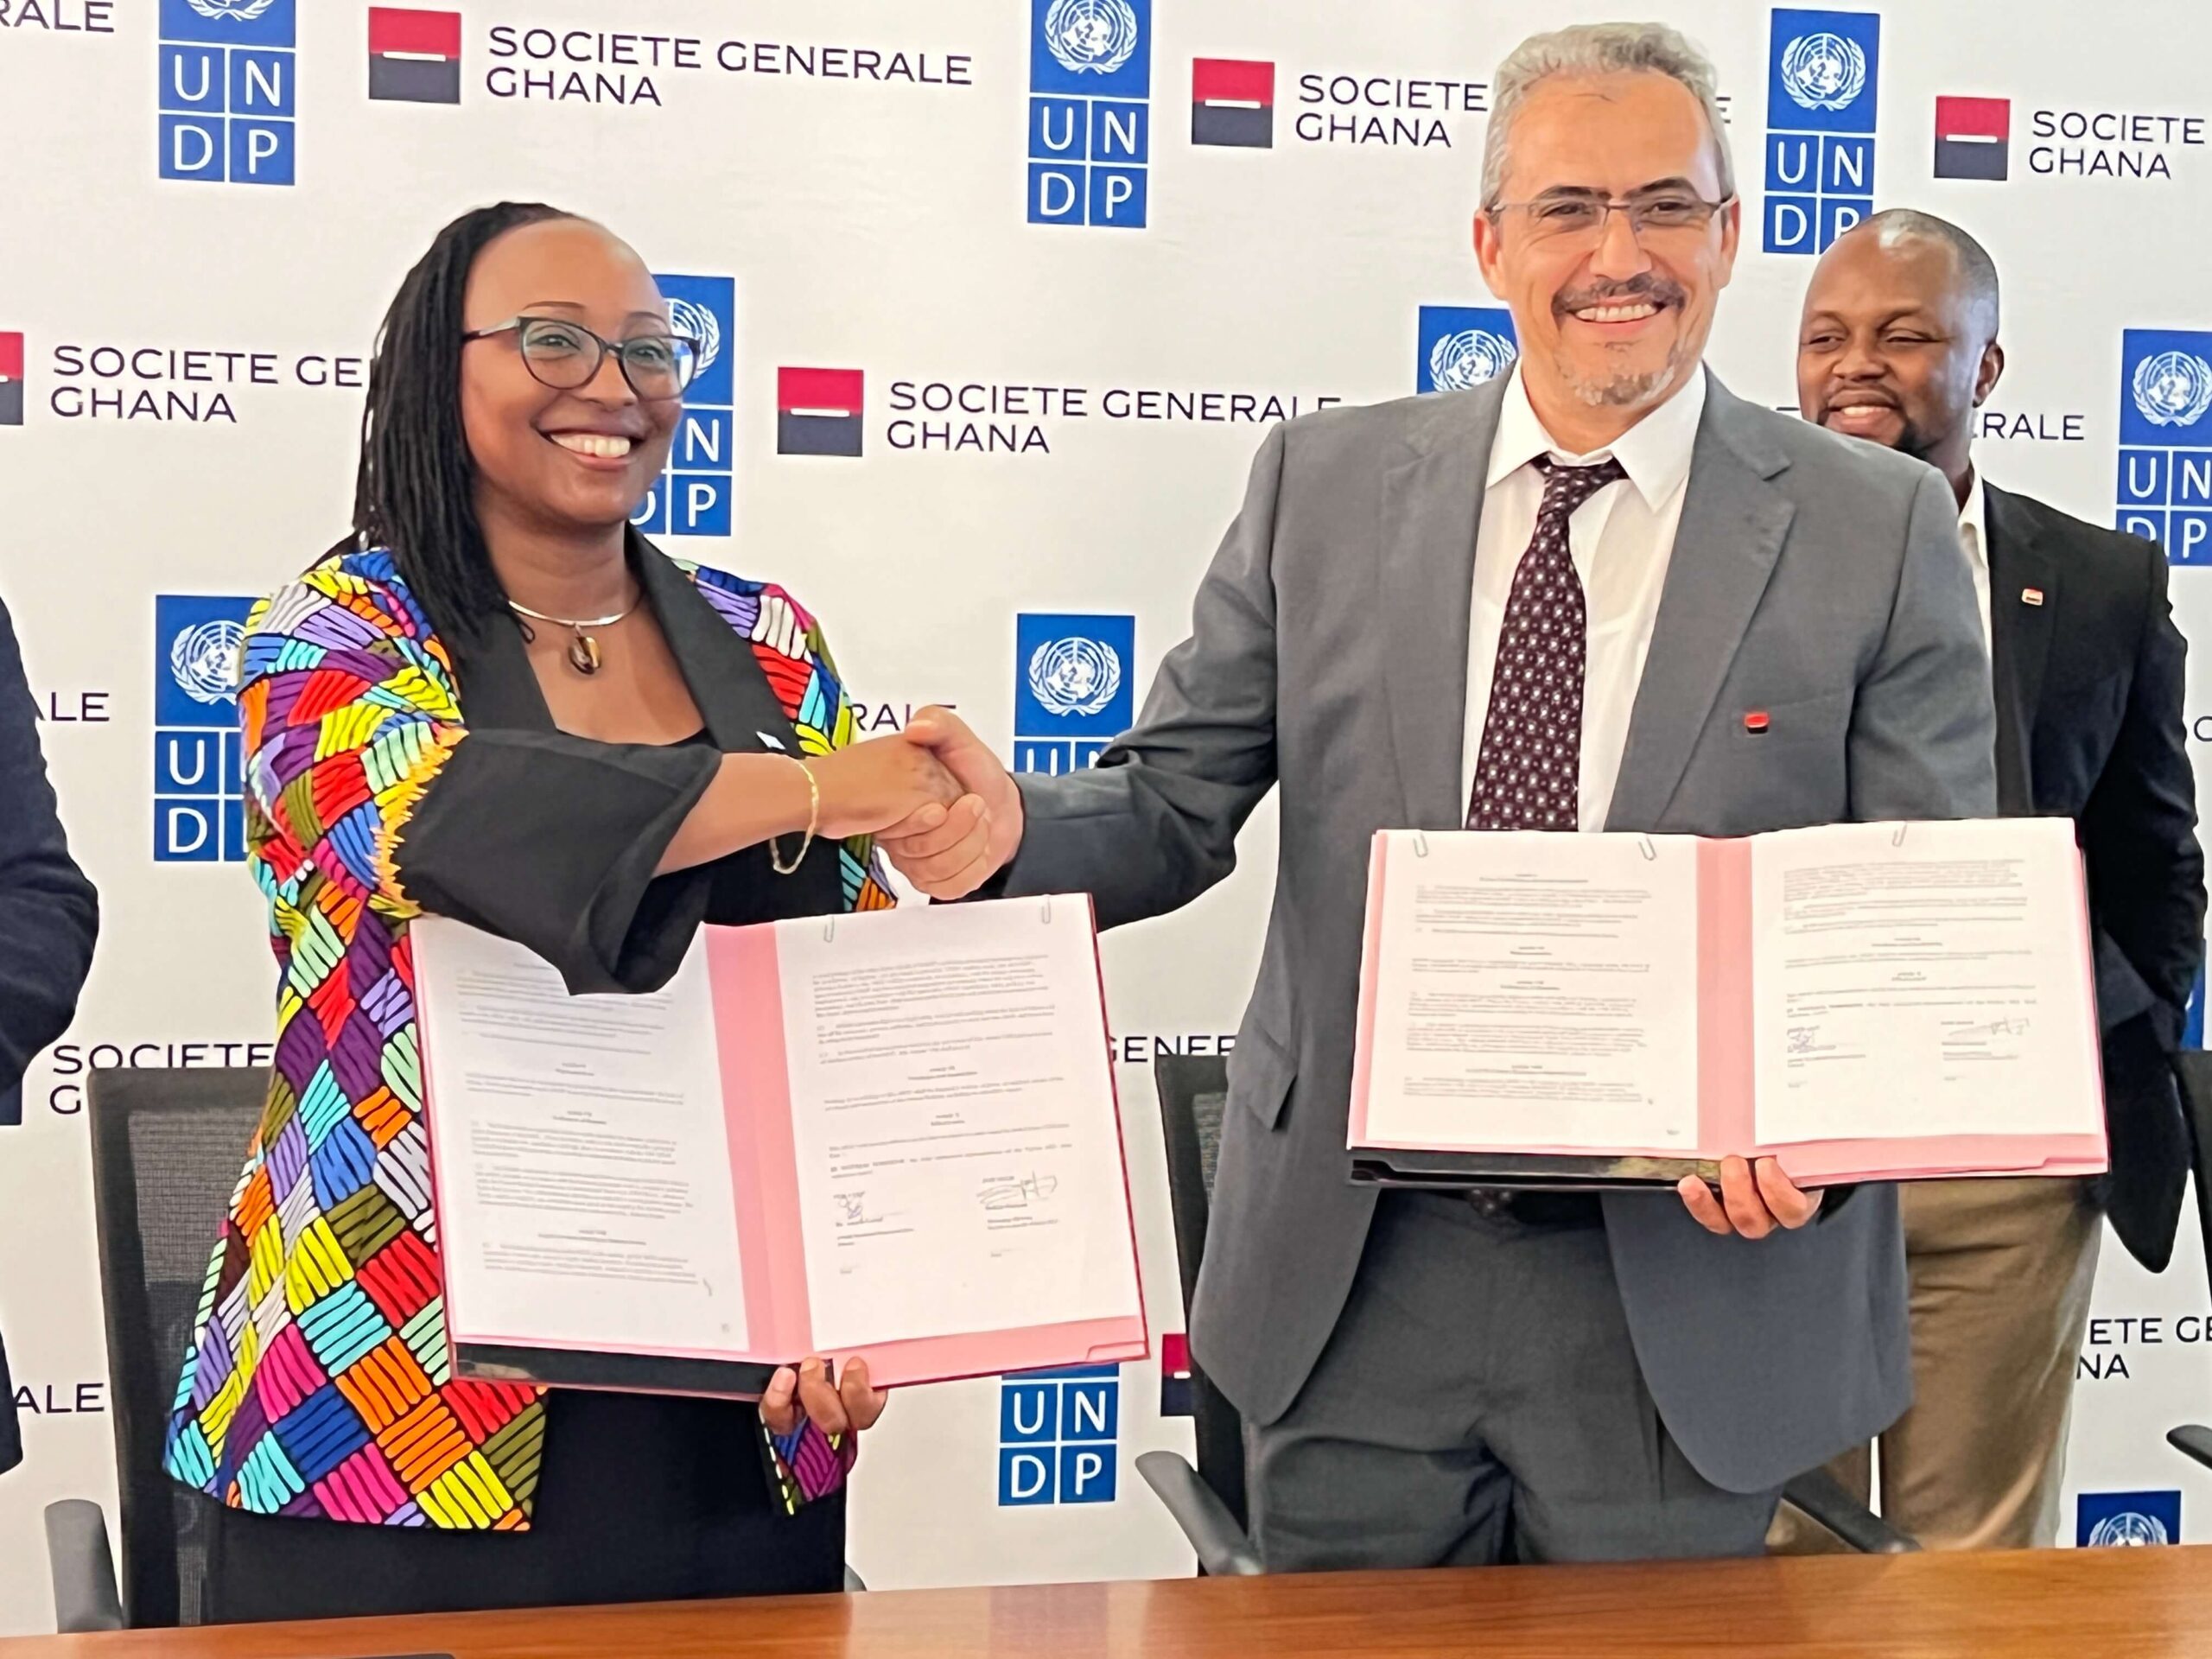 UNDP and Societe Generale Ghana PLC partner to promote innovations and inclusive entrepreneurship in Ghana